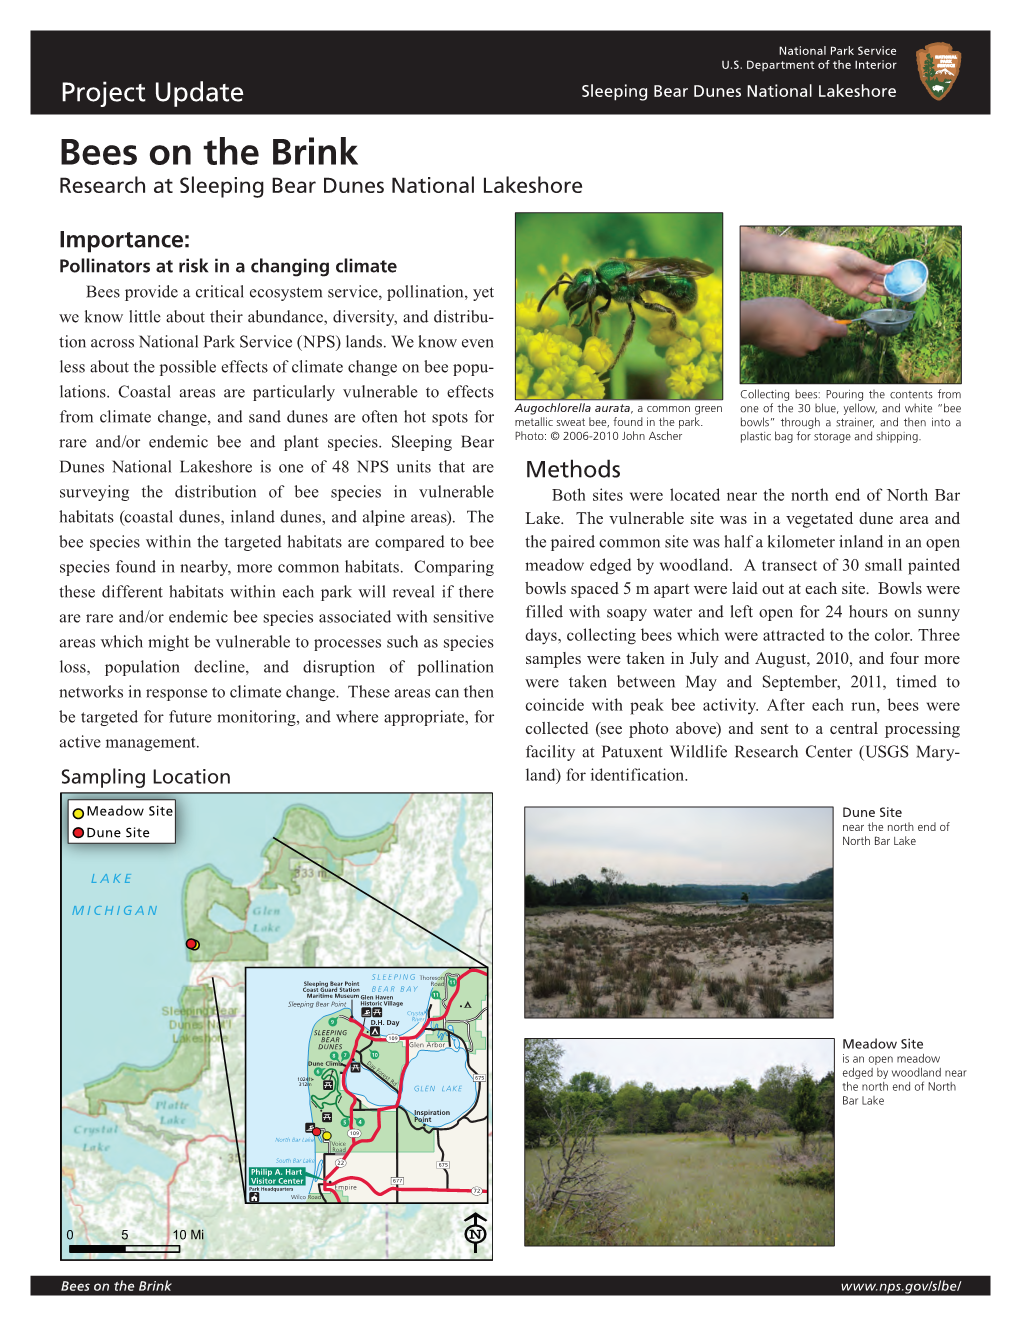 Bees on the Brink Research at Sleeping Bear Dunes National Lakeshore